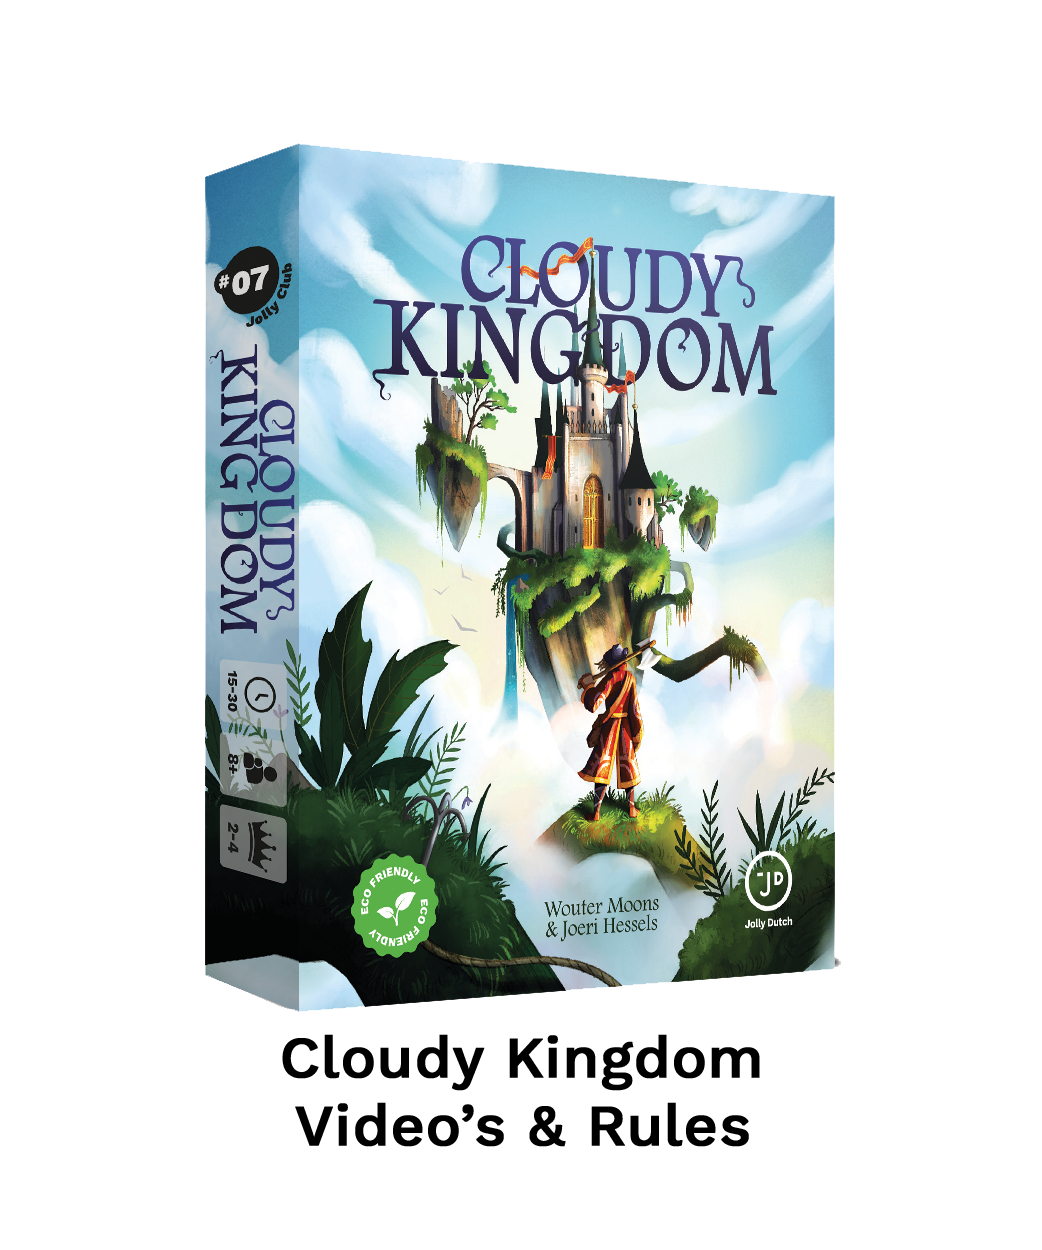 Go to Cloudy Kingdom video's and rules